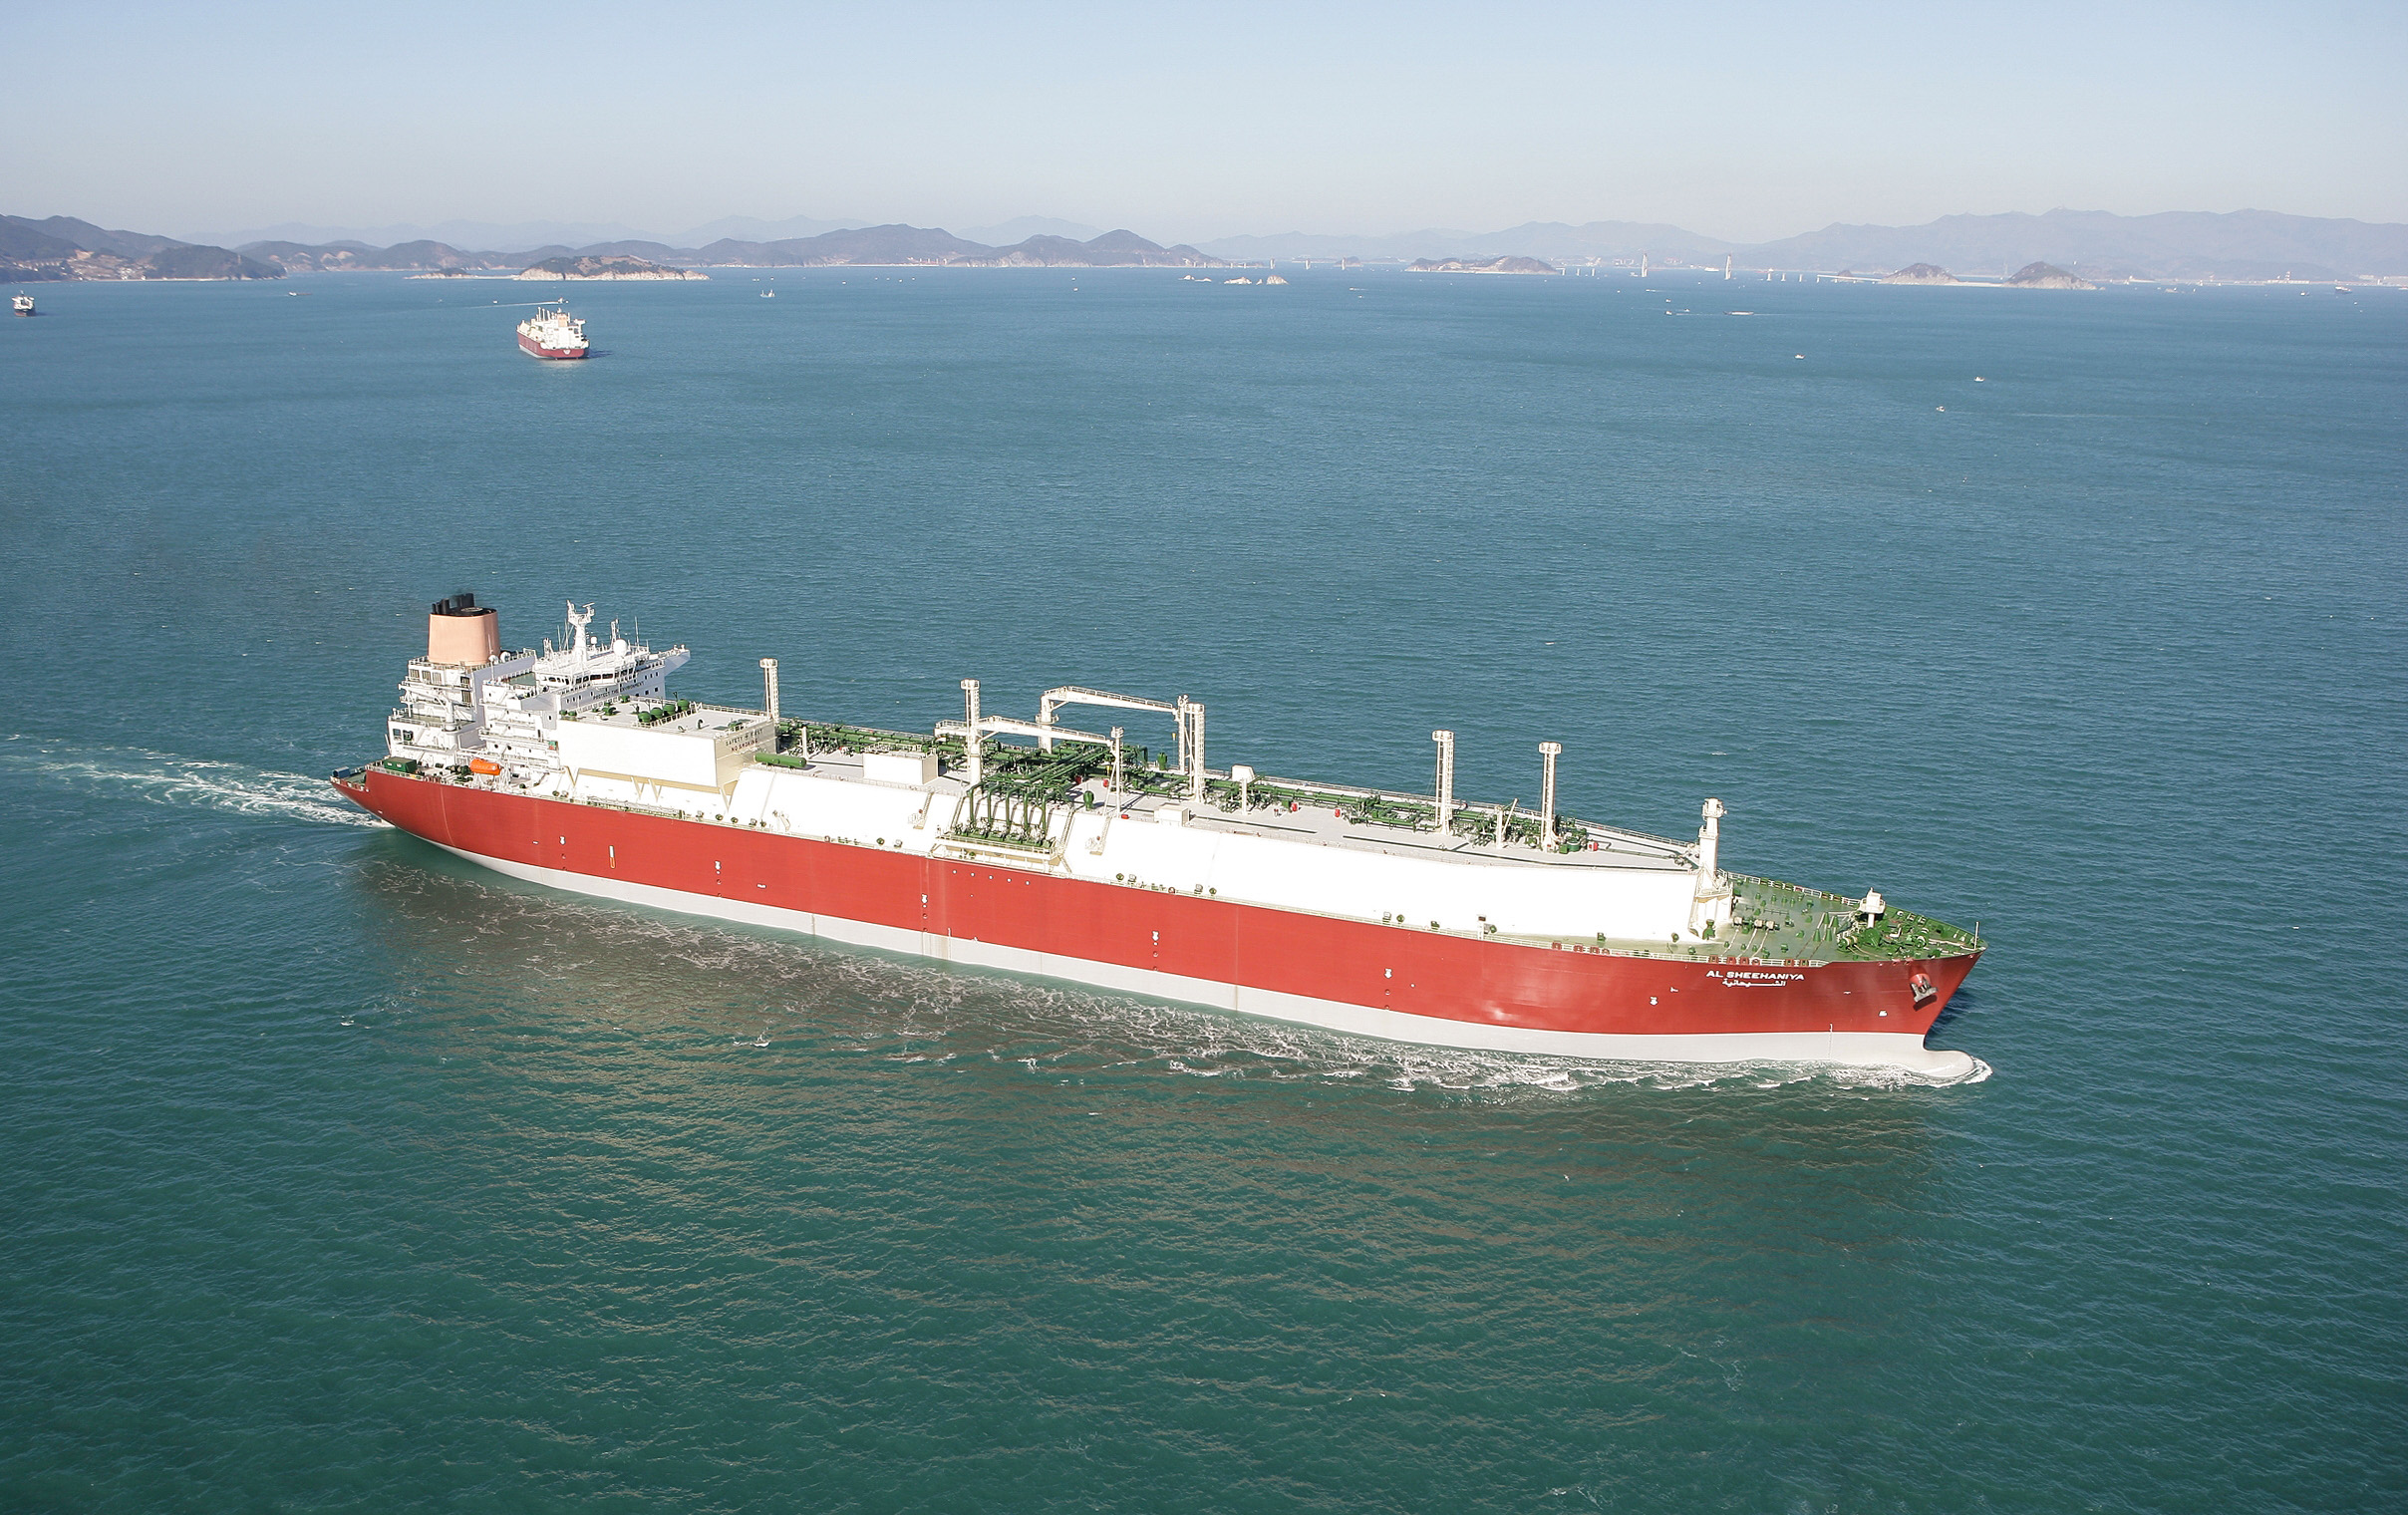 Wärtsilä signs support agreement with Nakilat for LNG carriers